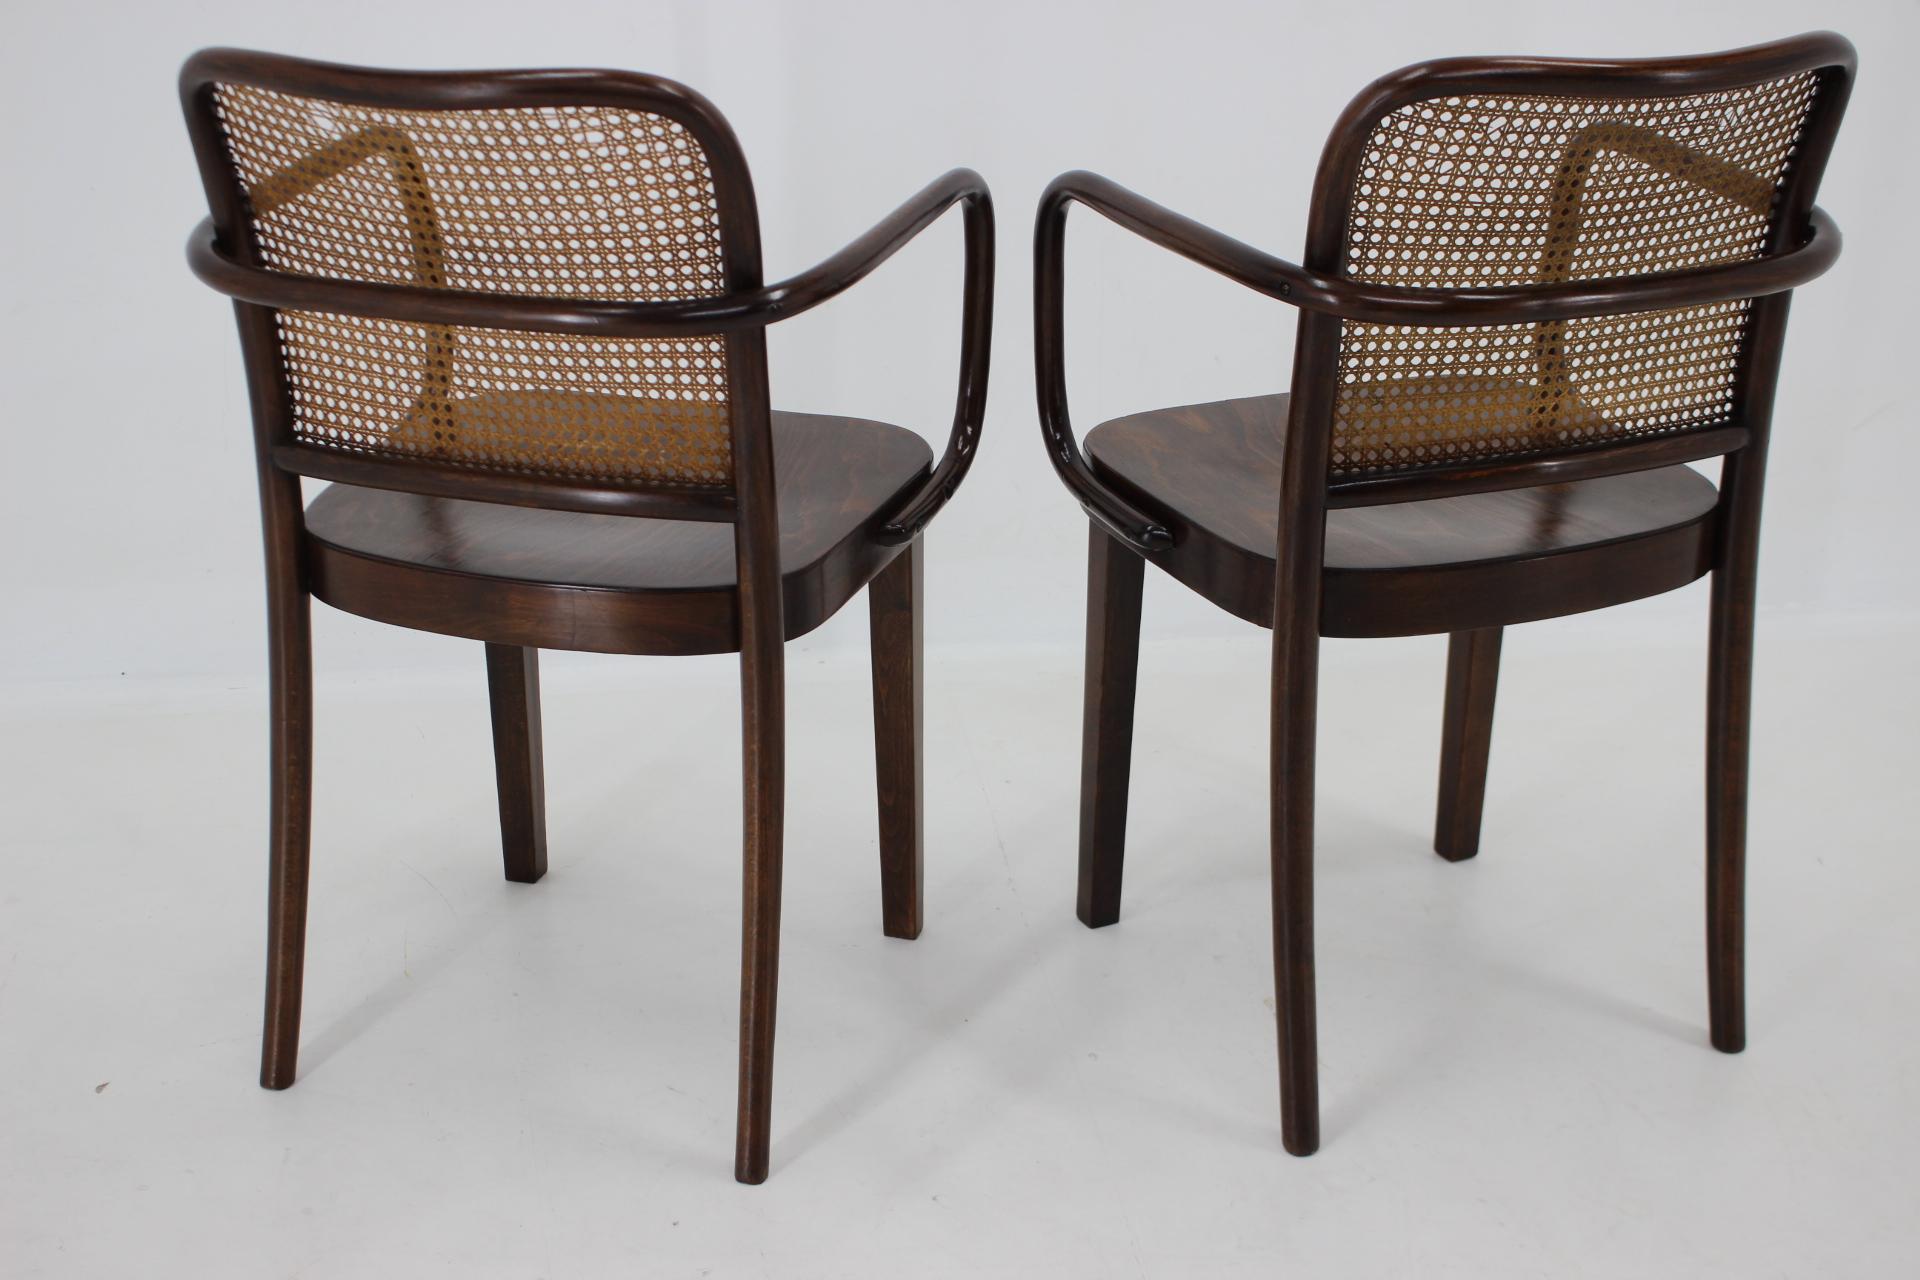 1920s Josef Hoffmann Bentwood Chairs, No. 811 for Thonet, Czechoslovakia For Sale 3